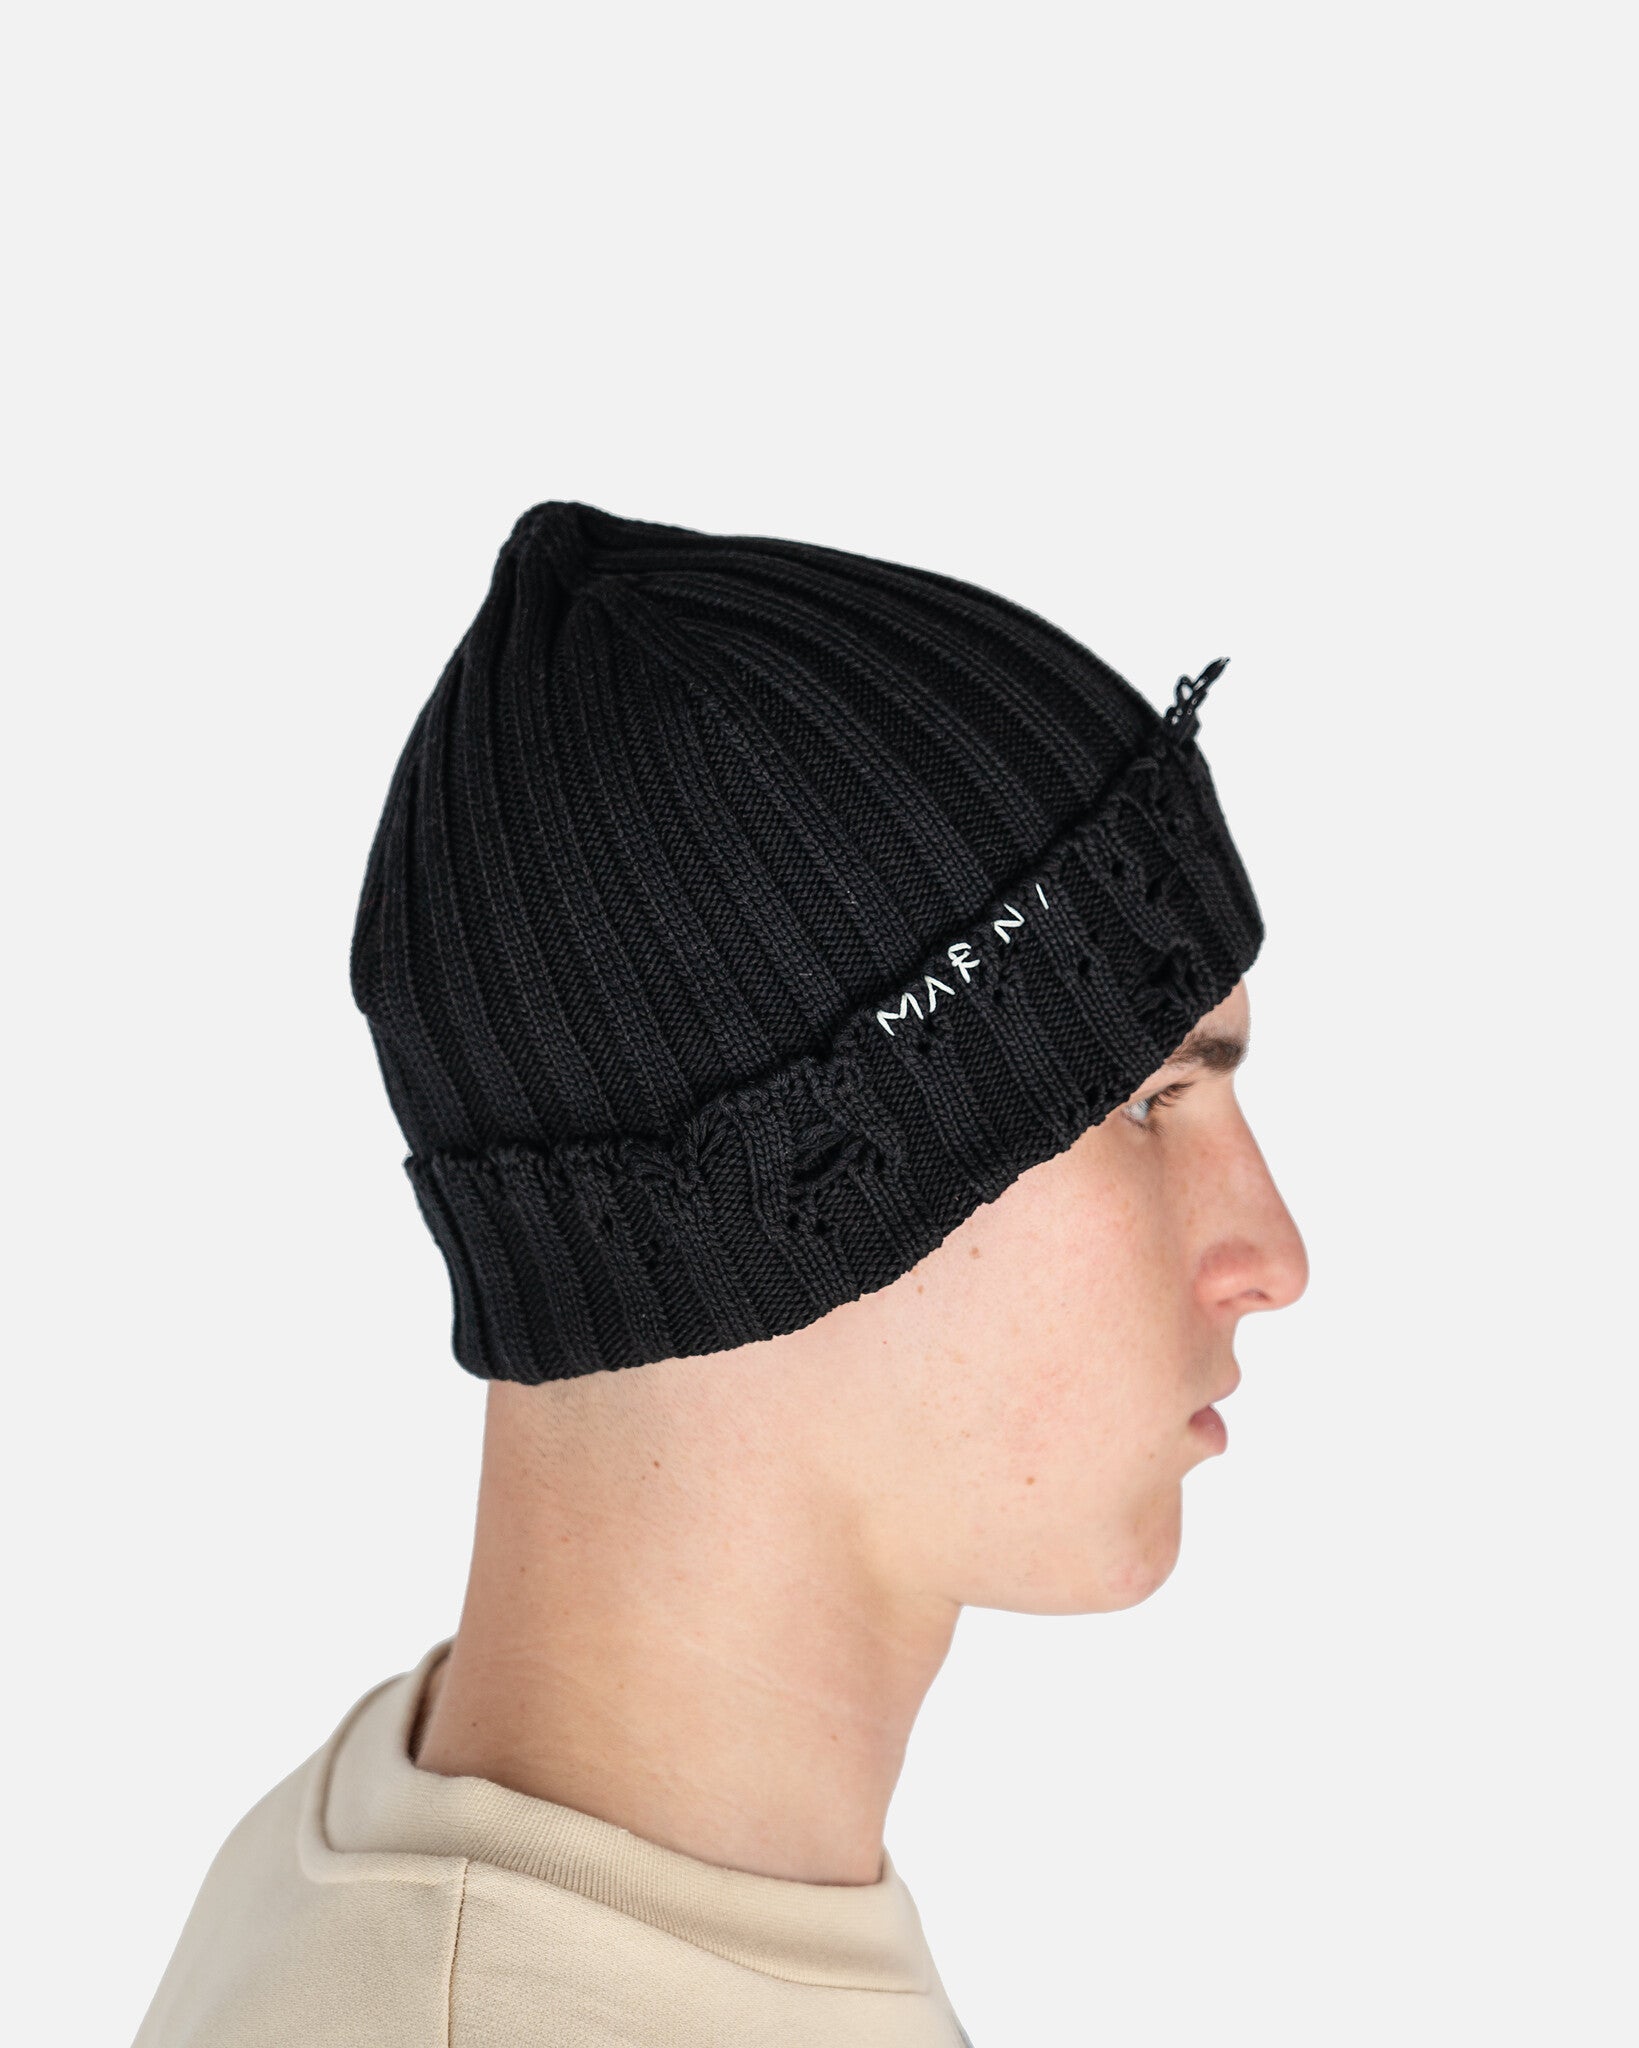 Marni Men's Hats Unfinished Edge Cotton Beanie in Black